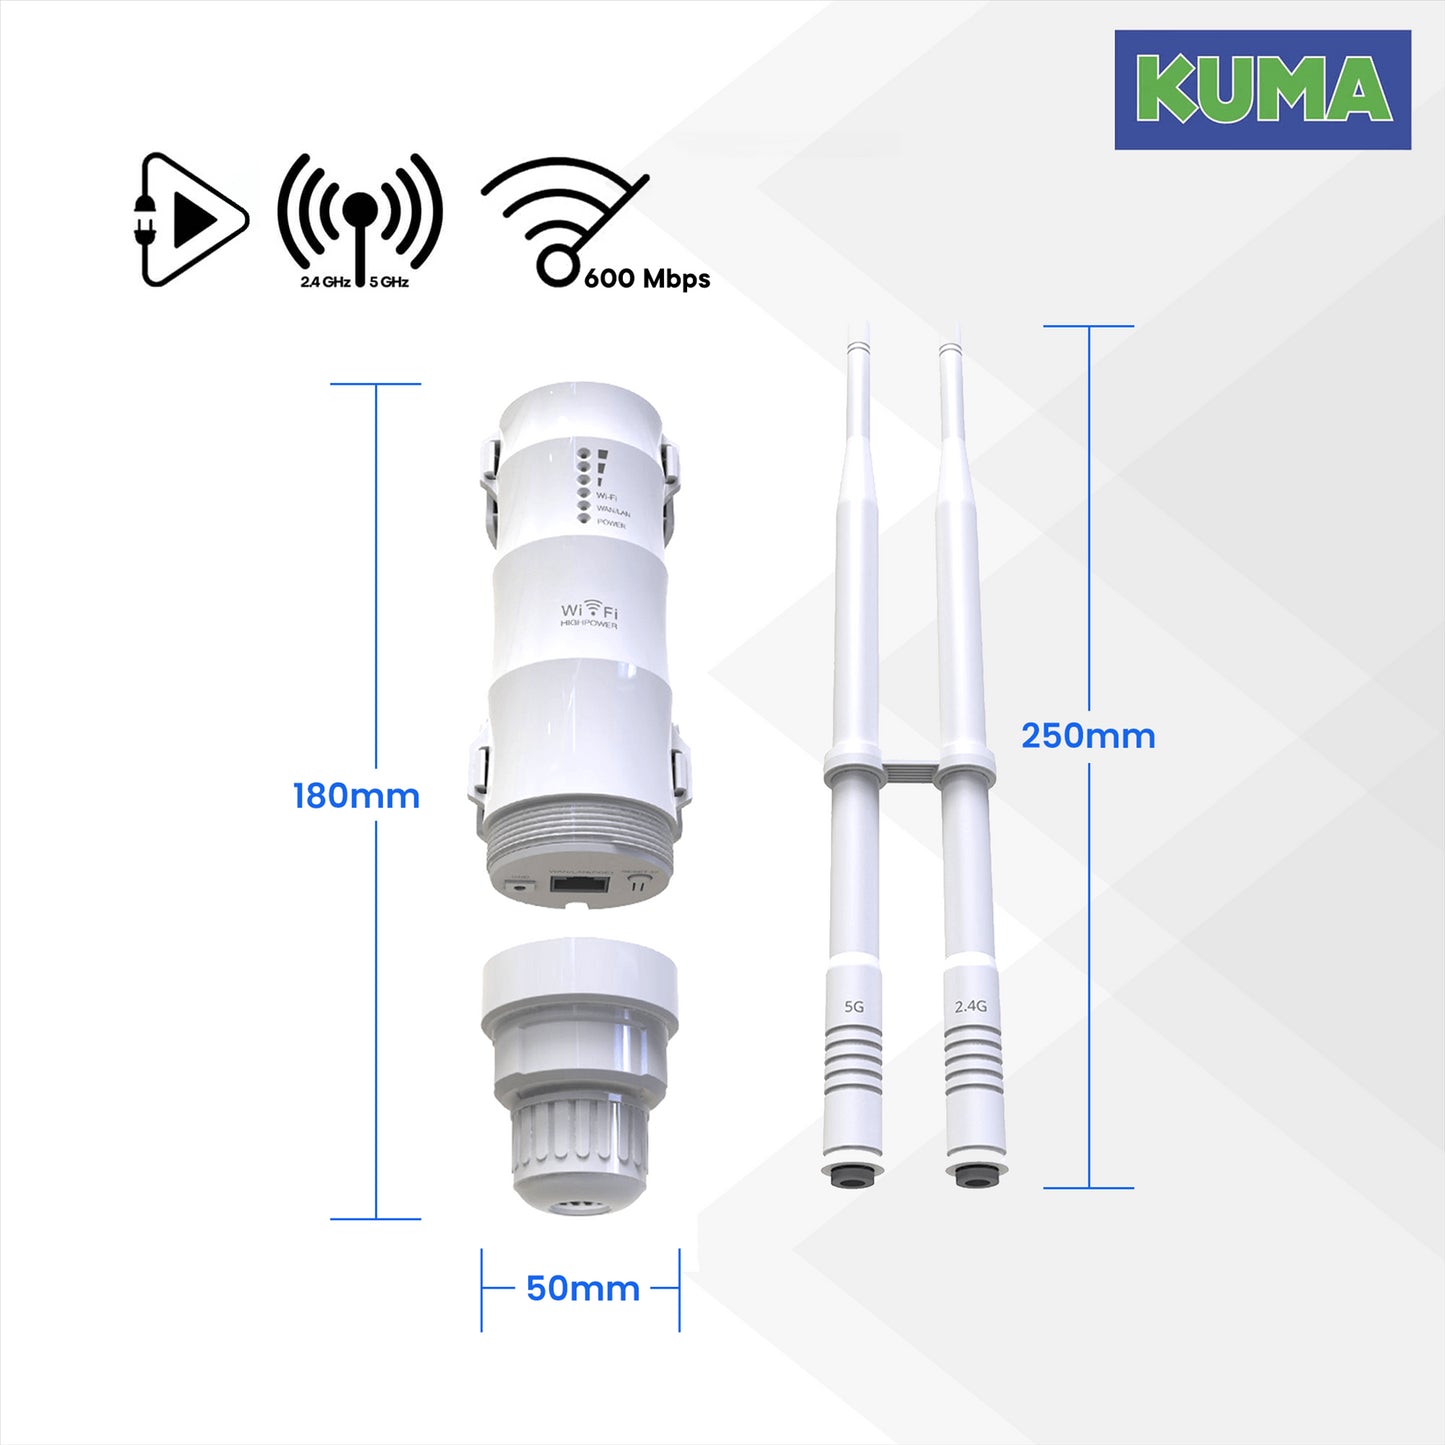 KUMA My-WiFi Hotspot Booster Kit - 5G Dual Band 2.4GHz + 5GHz Wi-Fi Signal Extender Built-in Router Antenna for Home Caravan Motorhome Boat Garden Office - Portable Wireless Mobile Internet Repeater